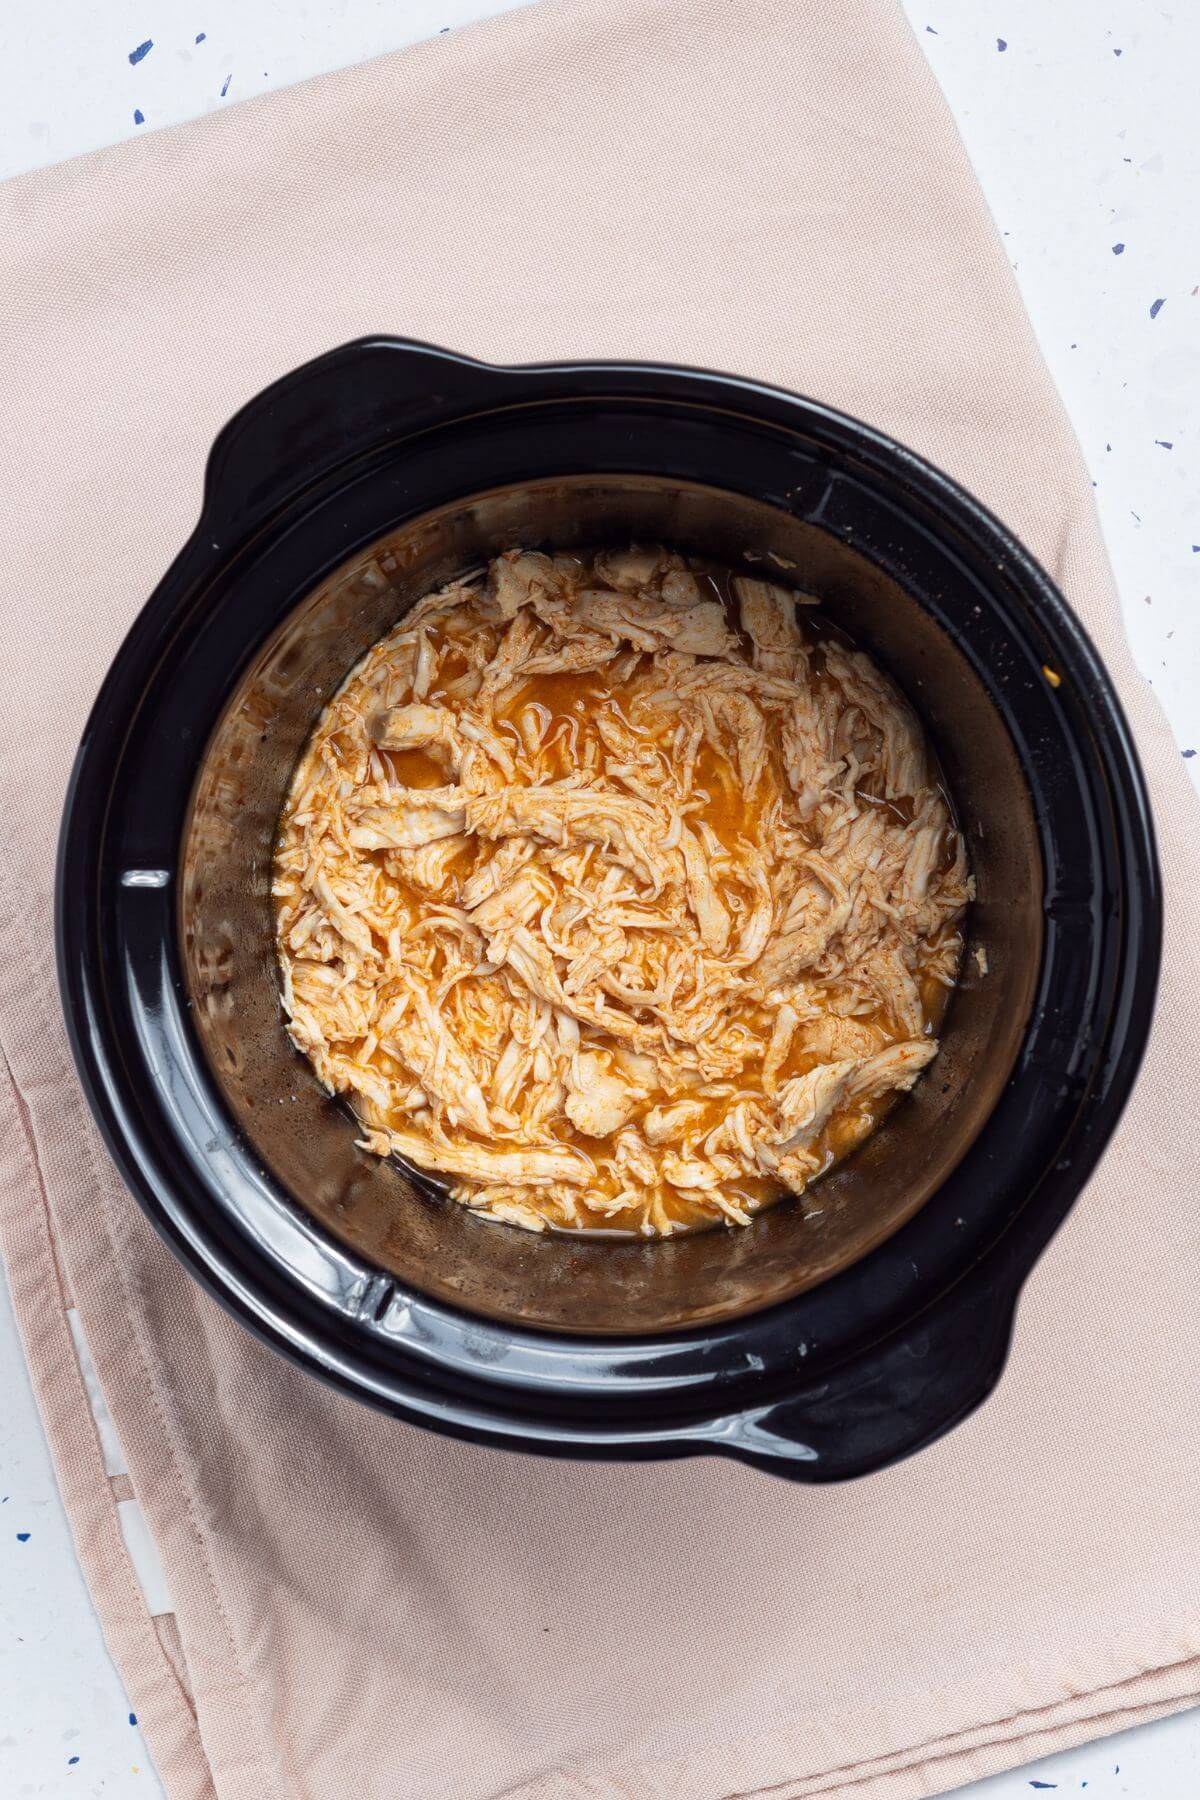 A crock pot with shredded chicken for tacos in it.